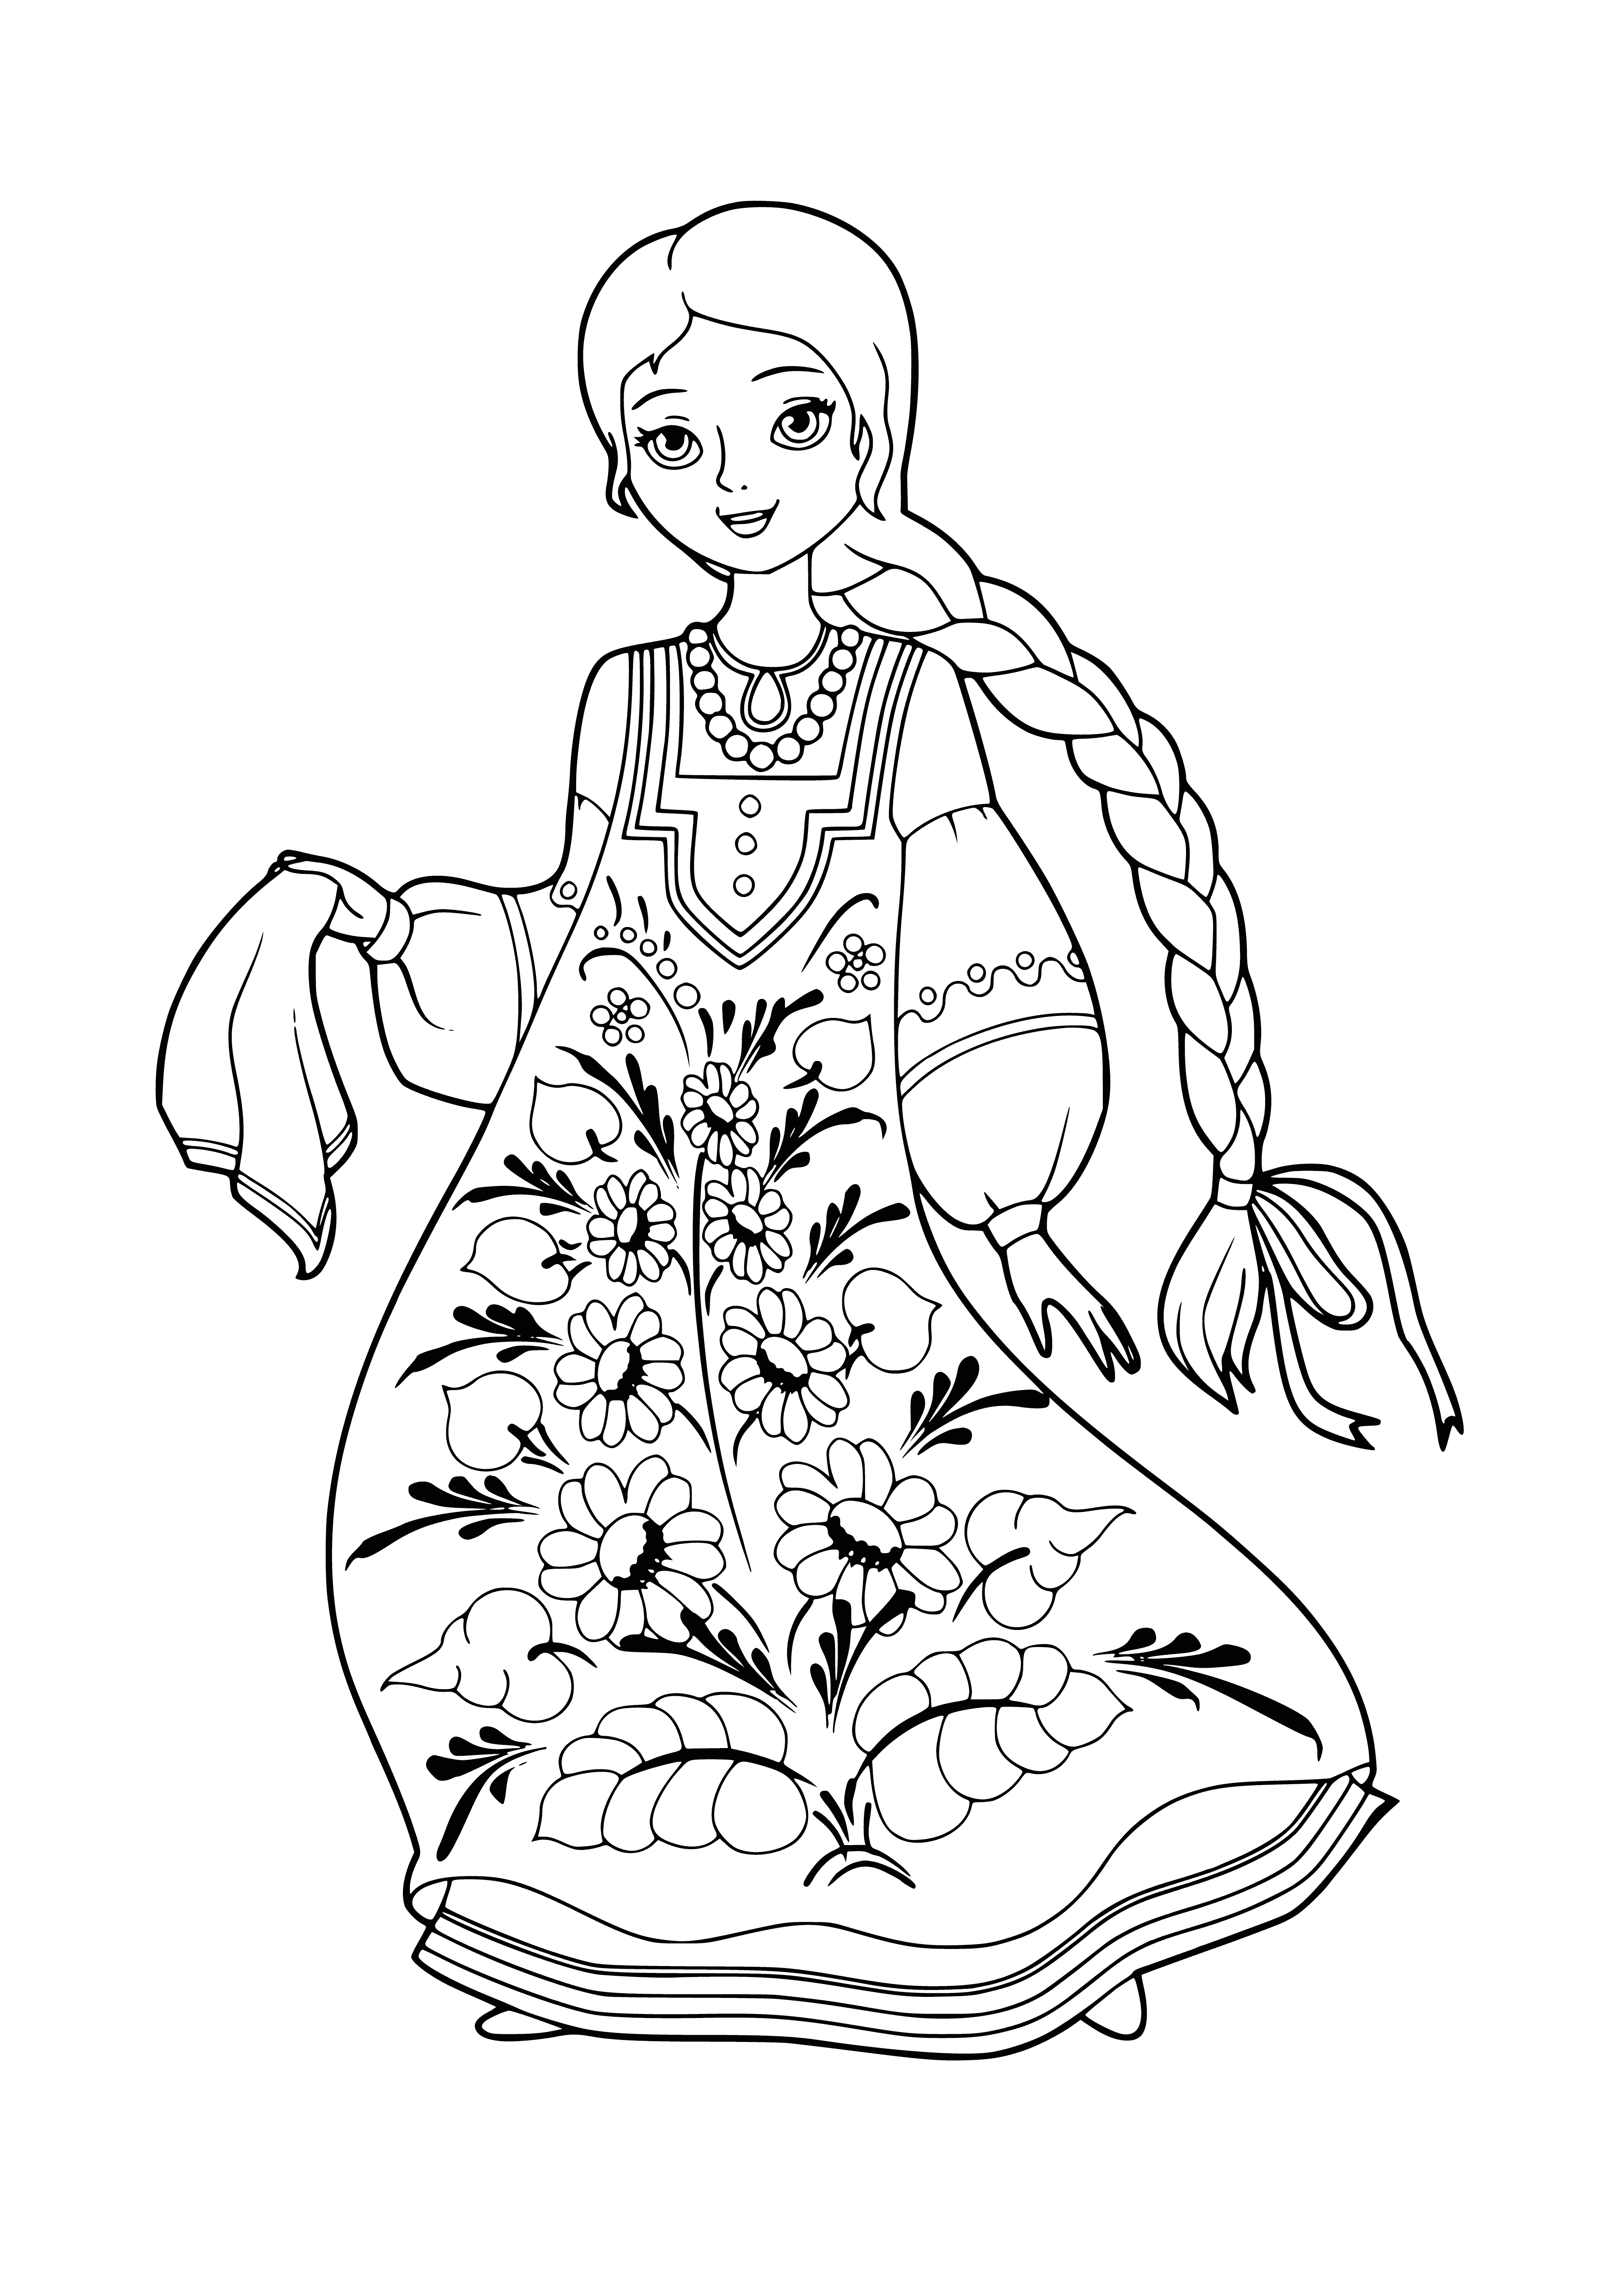 coloring page: Three women in traditional Russian clothing, with different coloured dresses and headscarves, gathered together in a blue sky with white clouds.